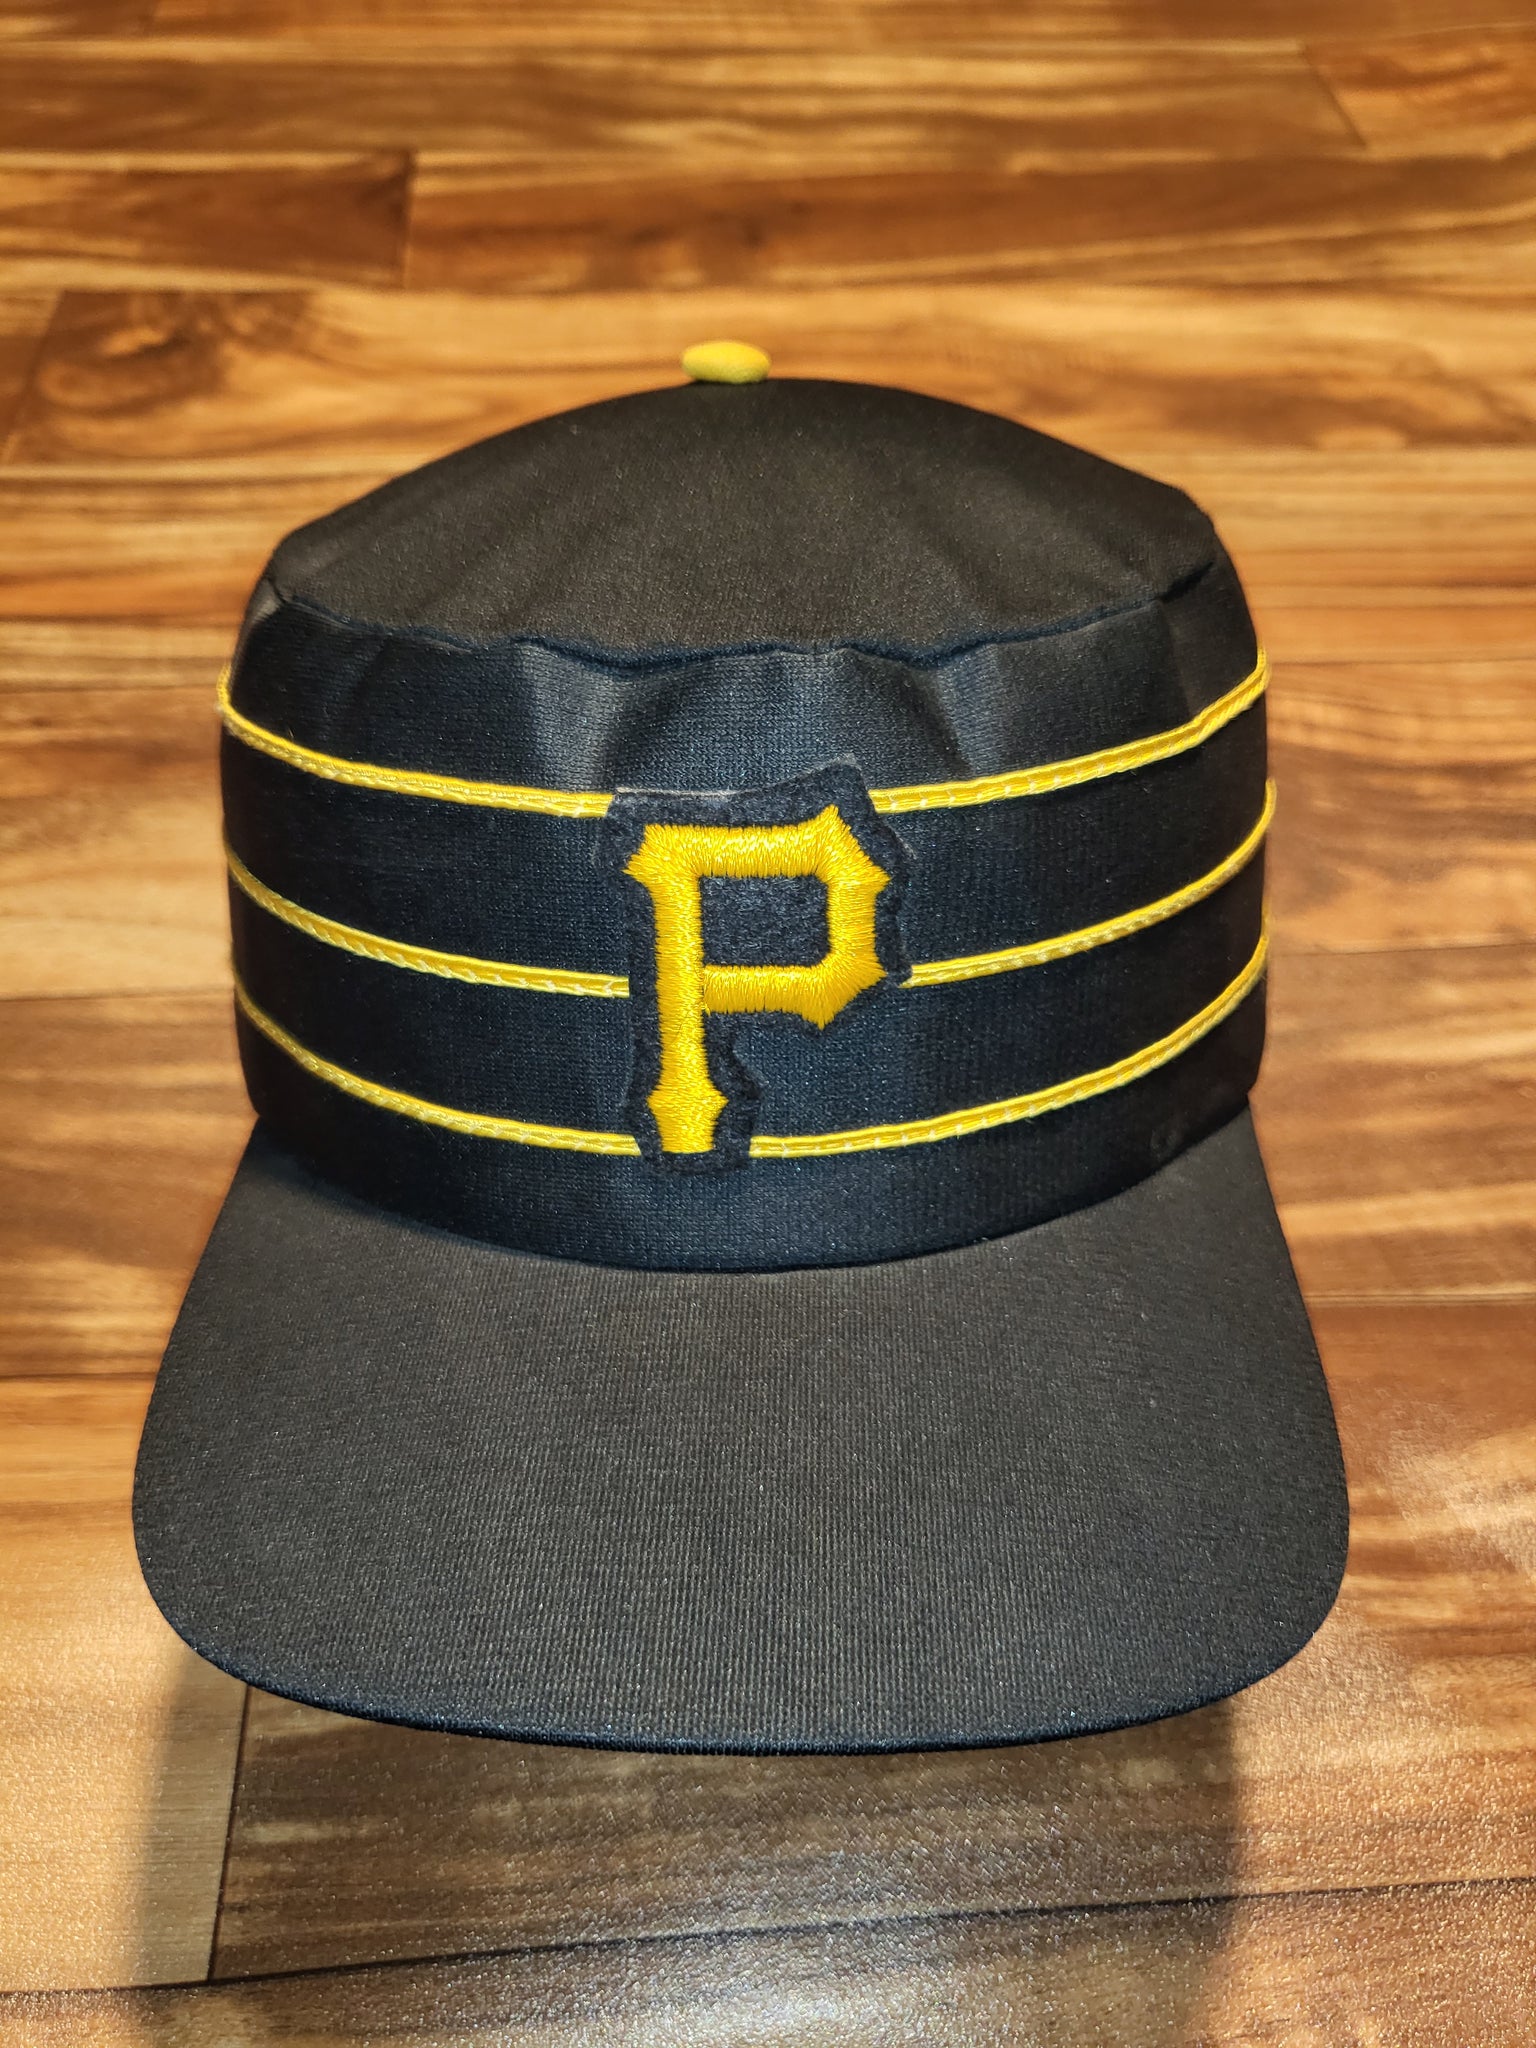 Pittsburgh Pirates Signed Hats, Collectible Pirates Hats